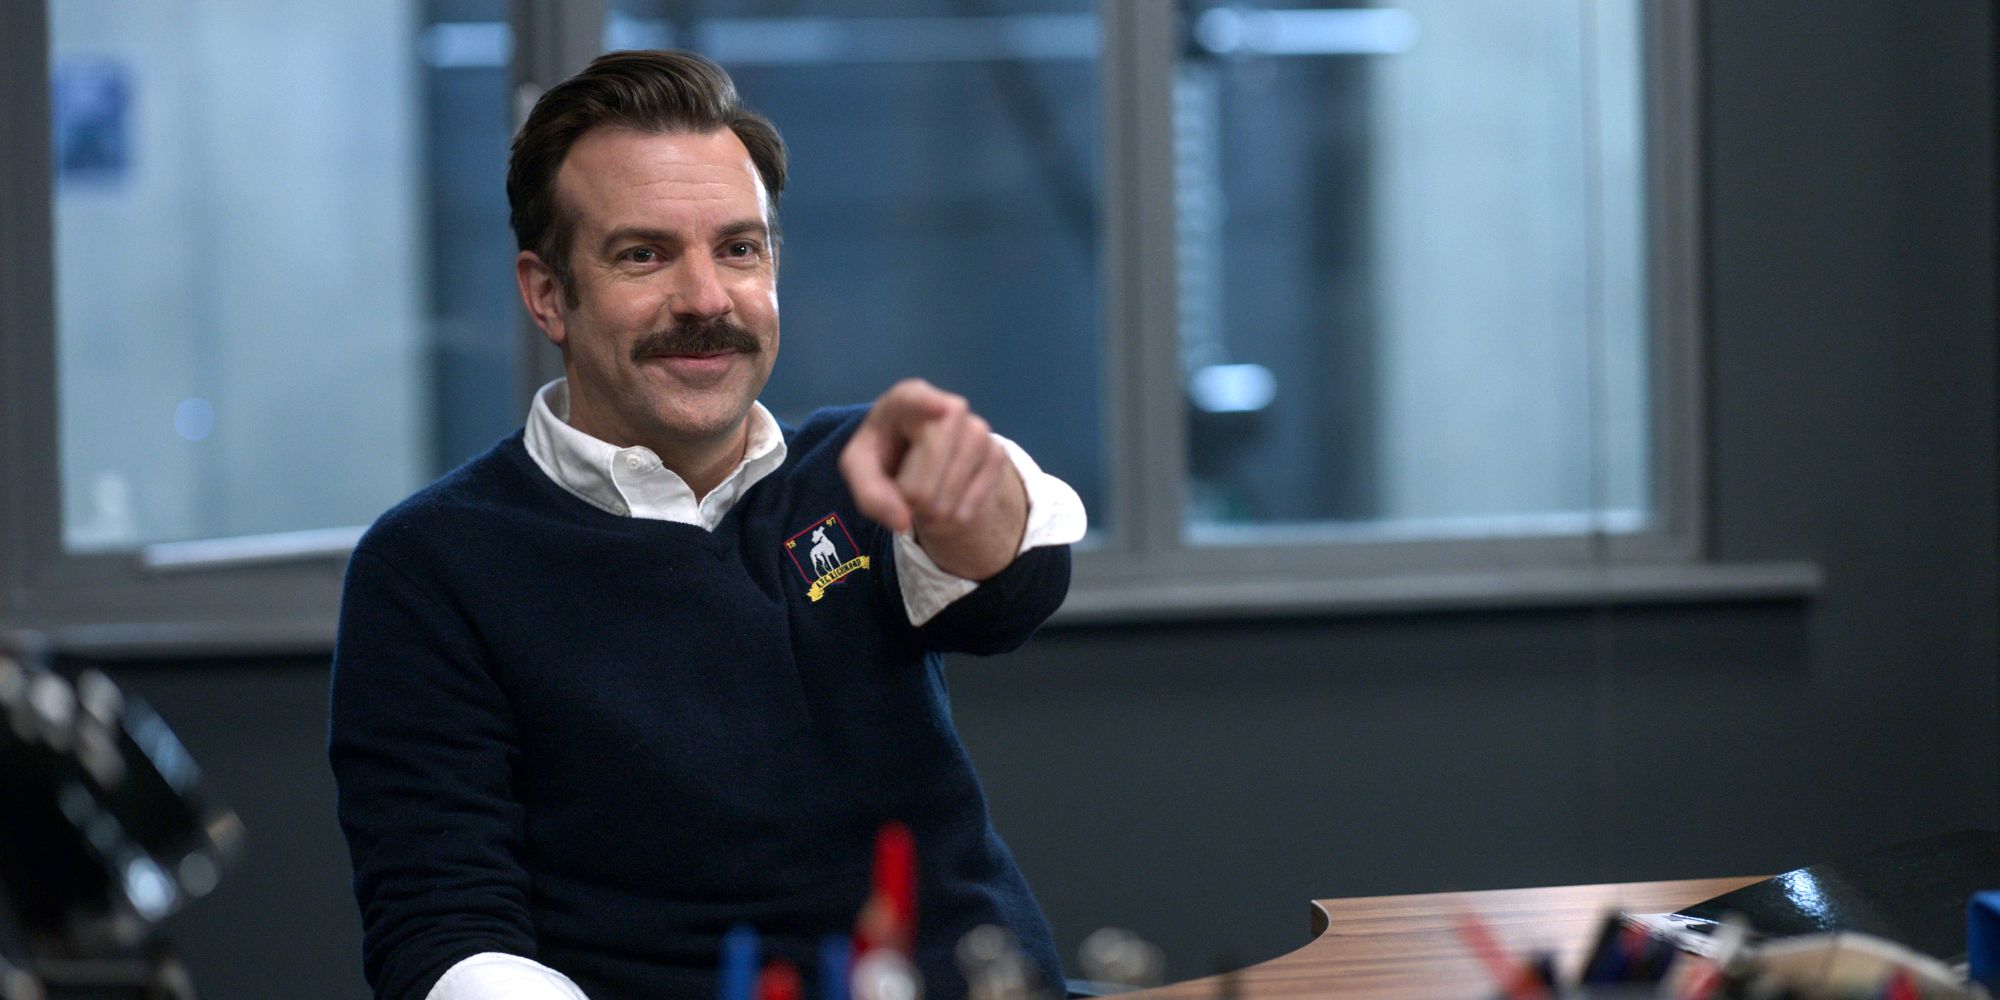 Ted Lasso smiles and points at someone